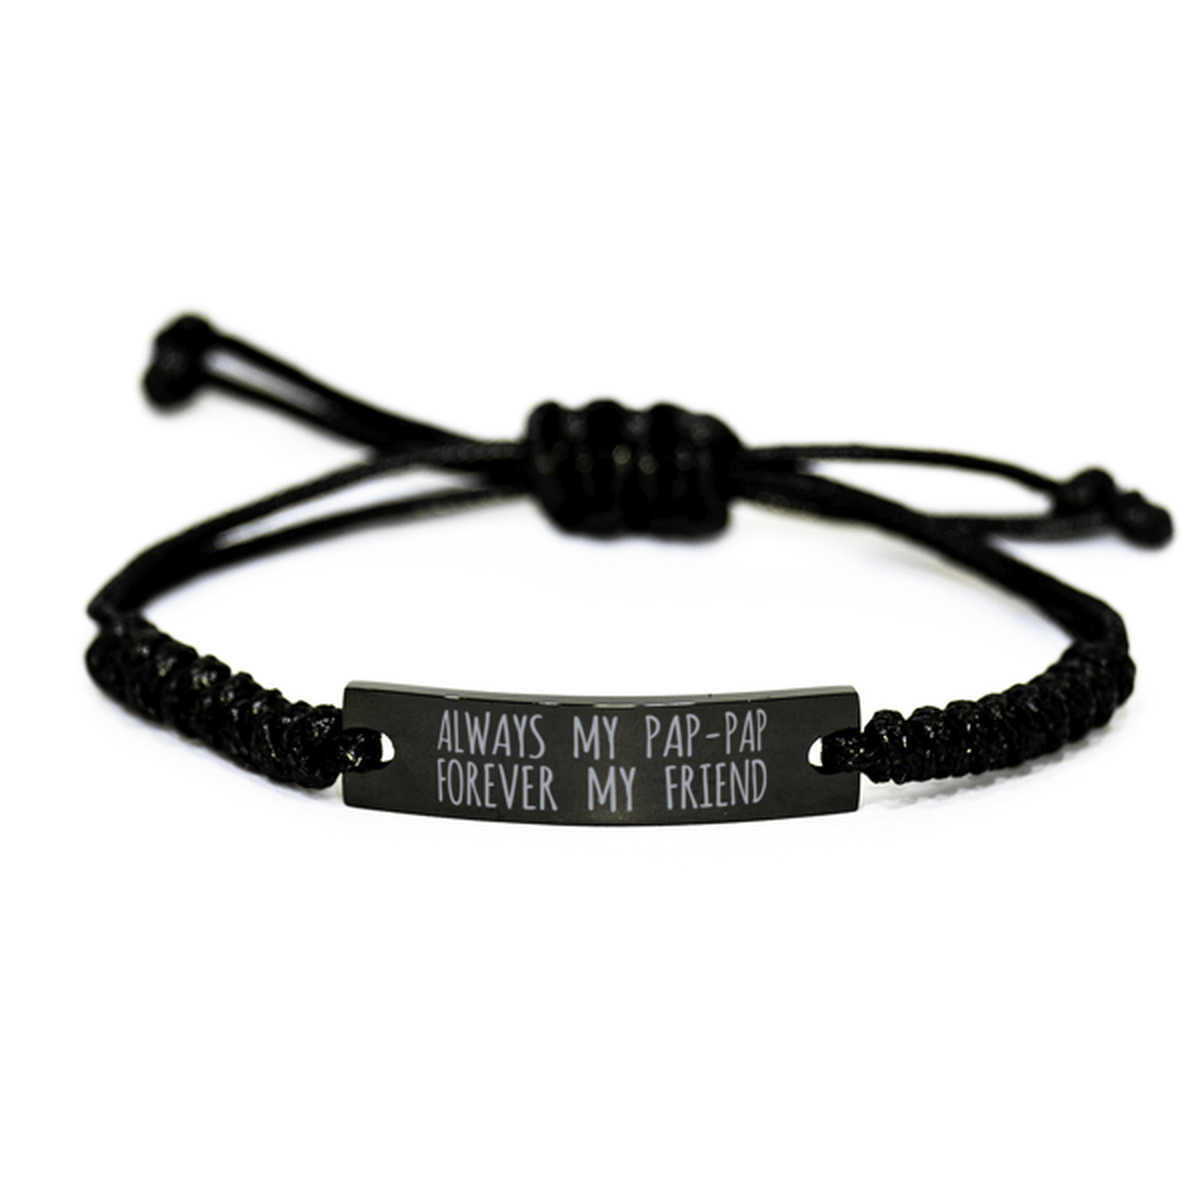 Inspirational Pap Pap Black Rope Bracelet, Always My Pap Pap Forever My Friend, Best Birthday Gifts For Family